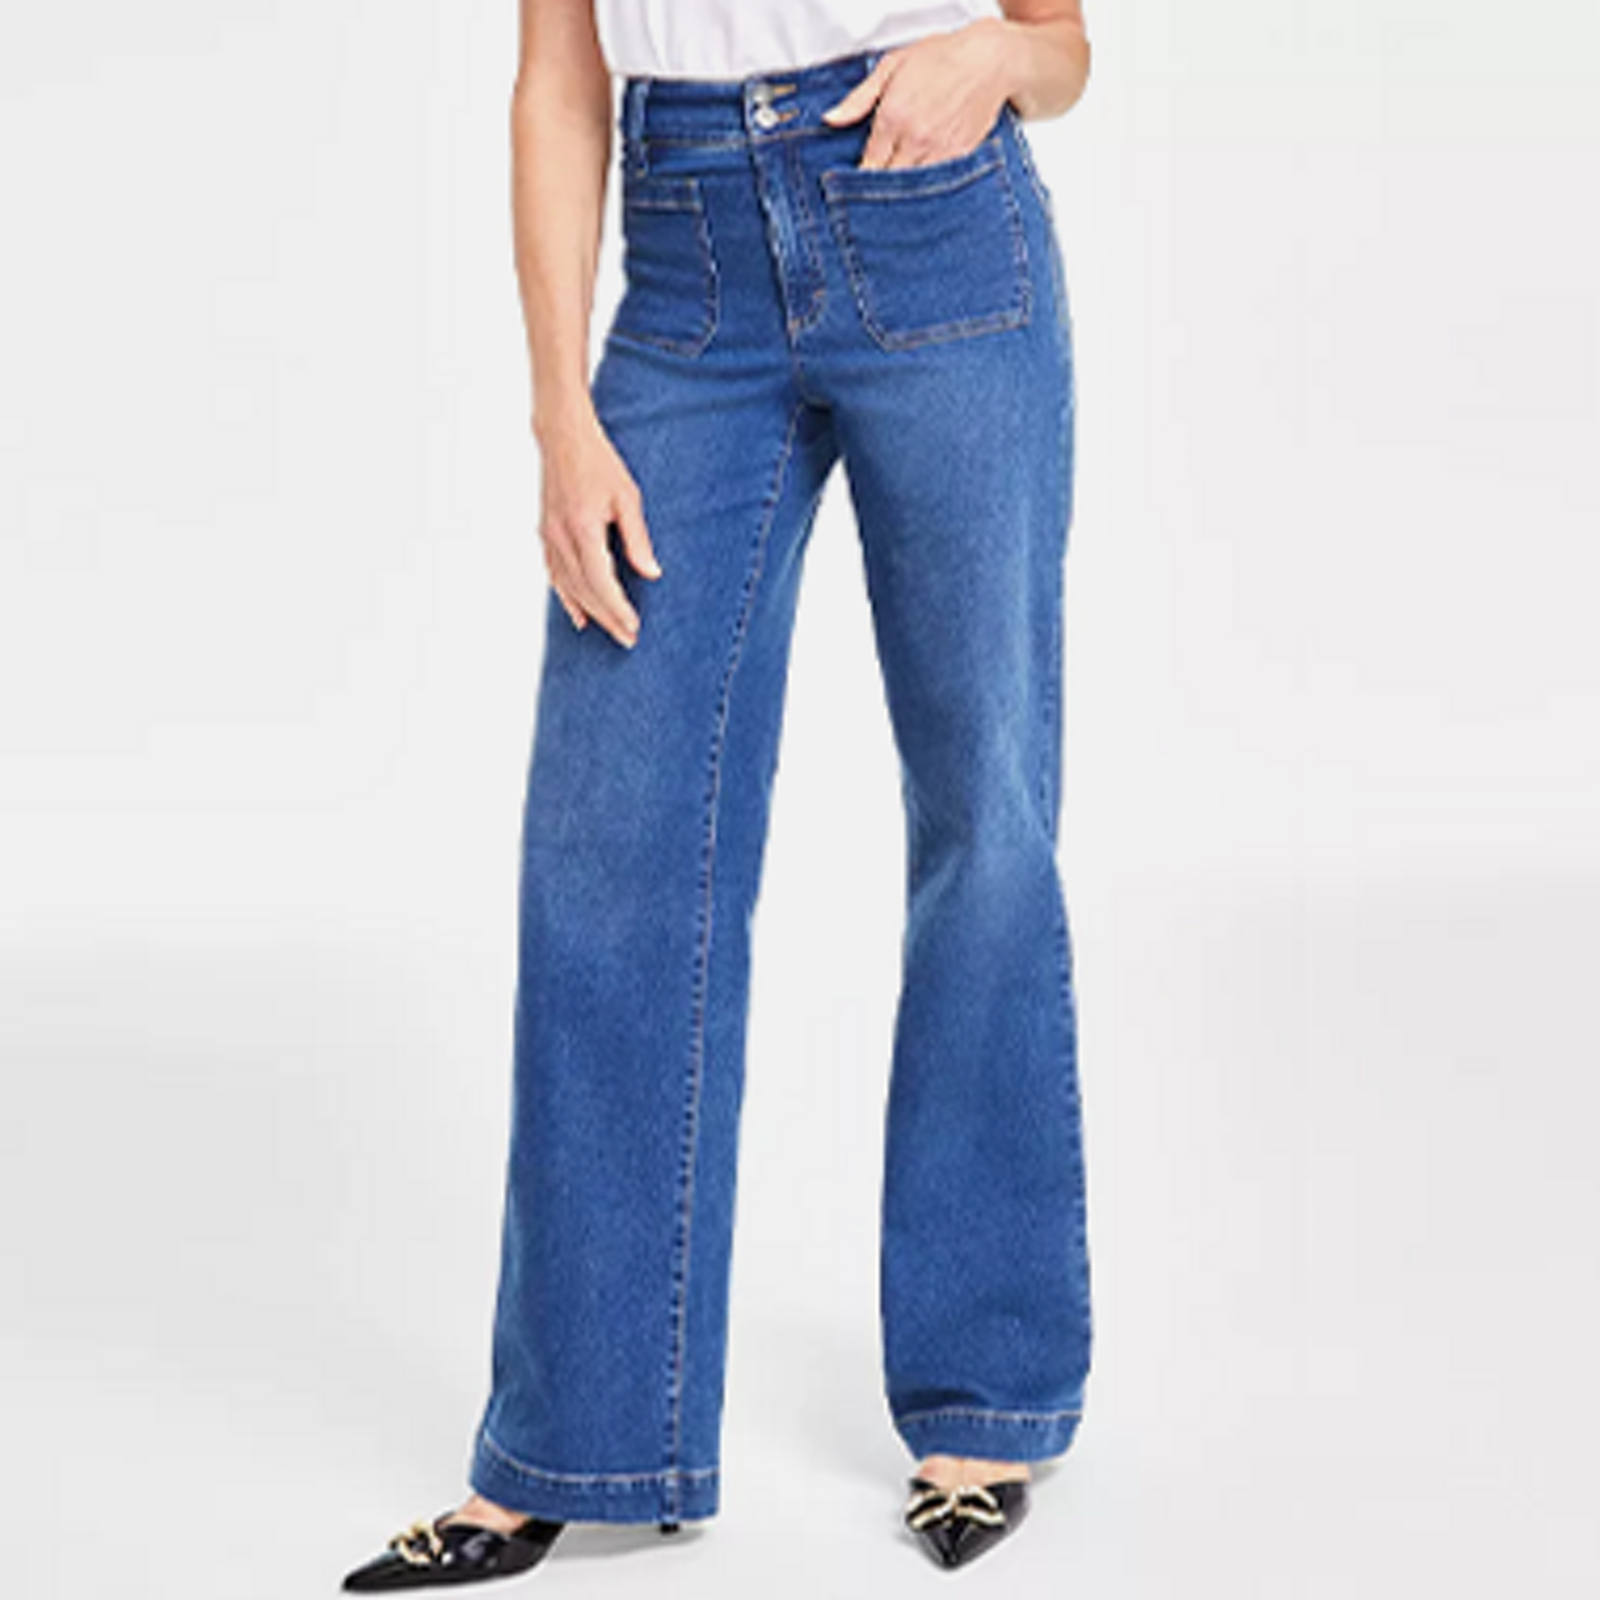 Juniors' Baby Flare Jean at Seven7 Jeans